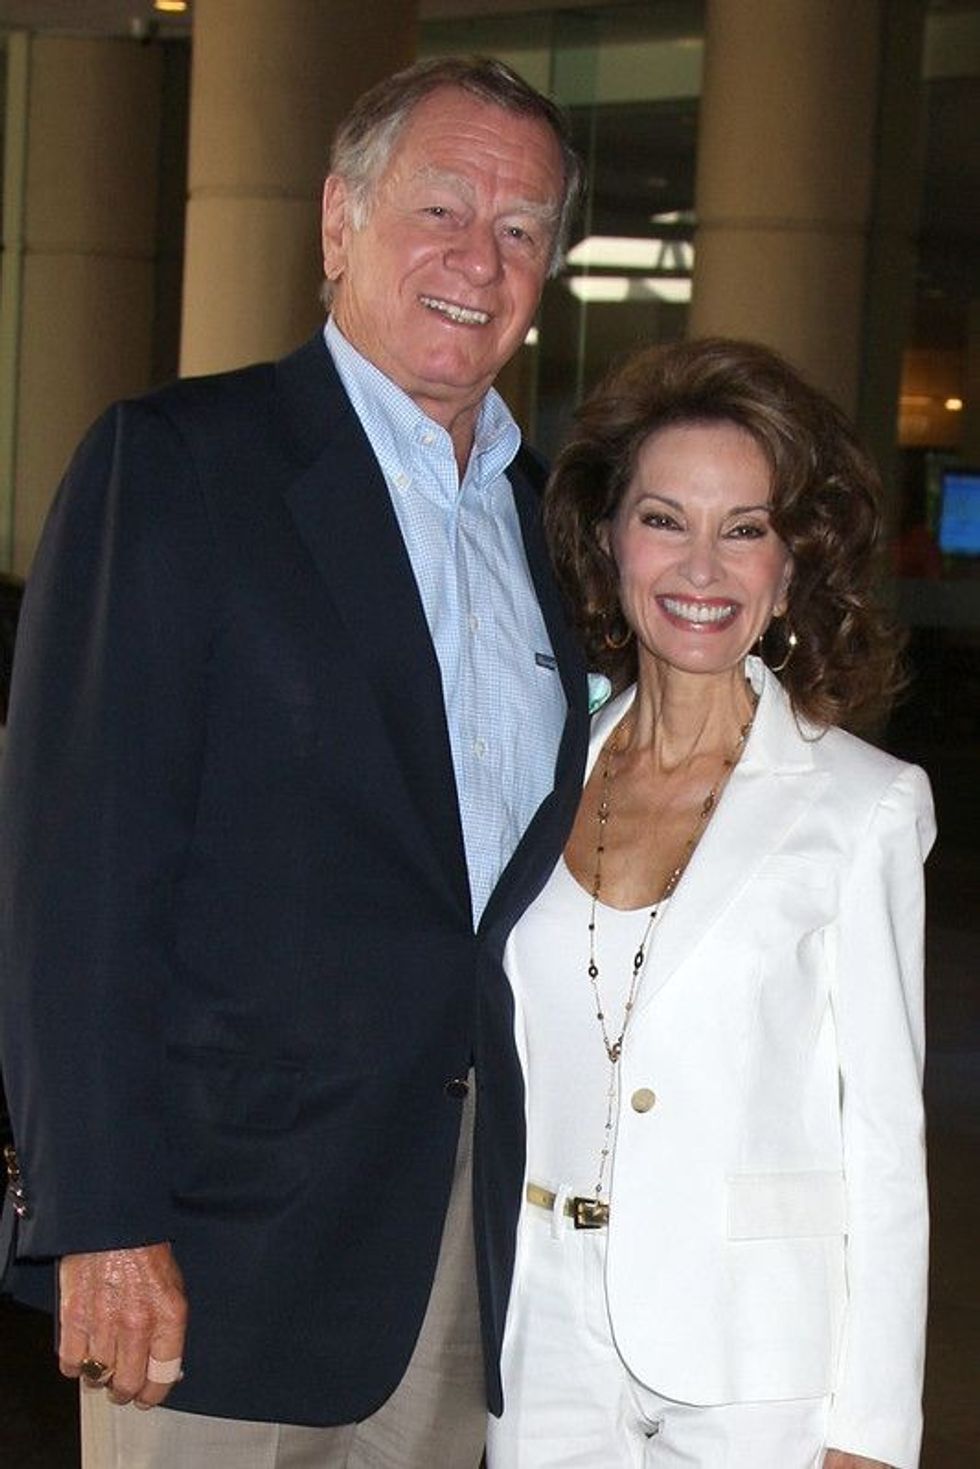 LOS ANGELES – AUGUST 2: Helmut Huber and Susan Lucci arrive at the Cable TCA Press Tour at the Beverly Hilton Hotel in Beverly Hills, California, on August 2, 2012.